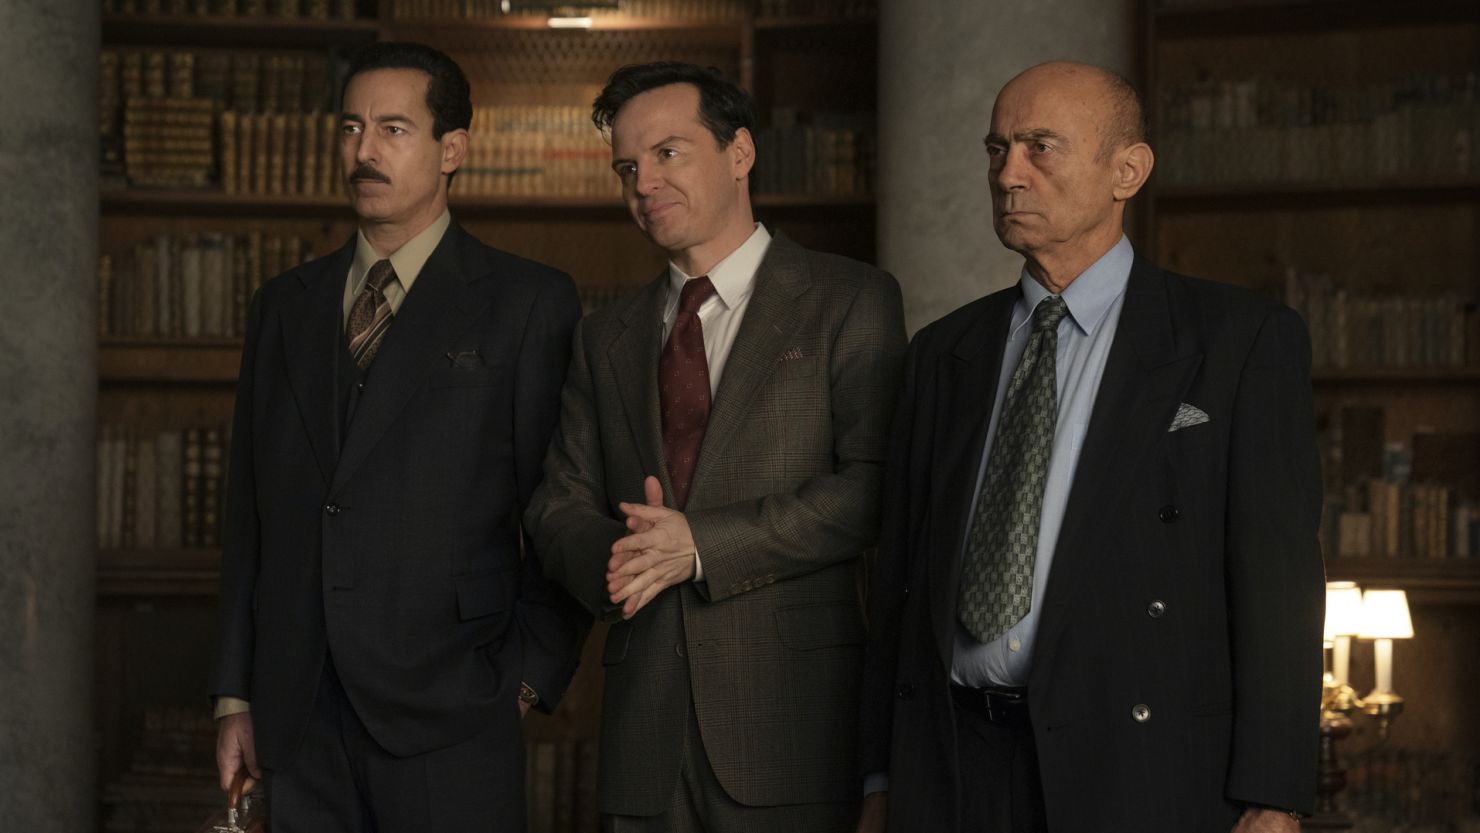 Salim Daw, Andrew Scott and Waleed Zuaiter in HBO's movie adaptation of the play 'Oslo' (Larry D. Horricks/HBO).